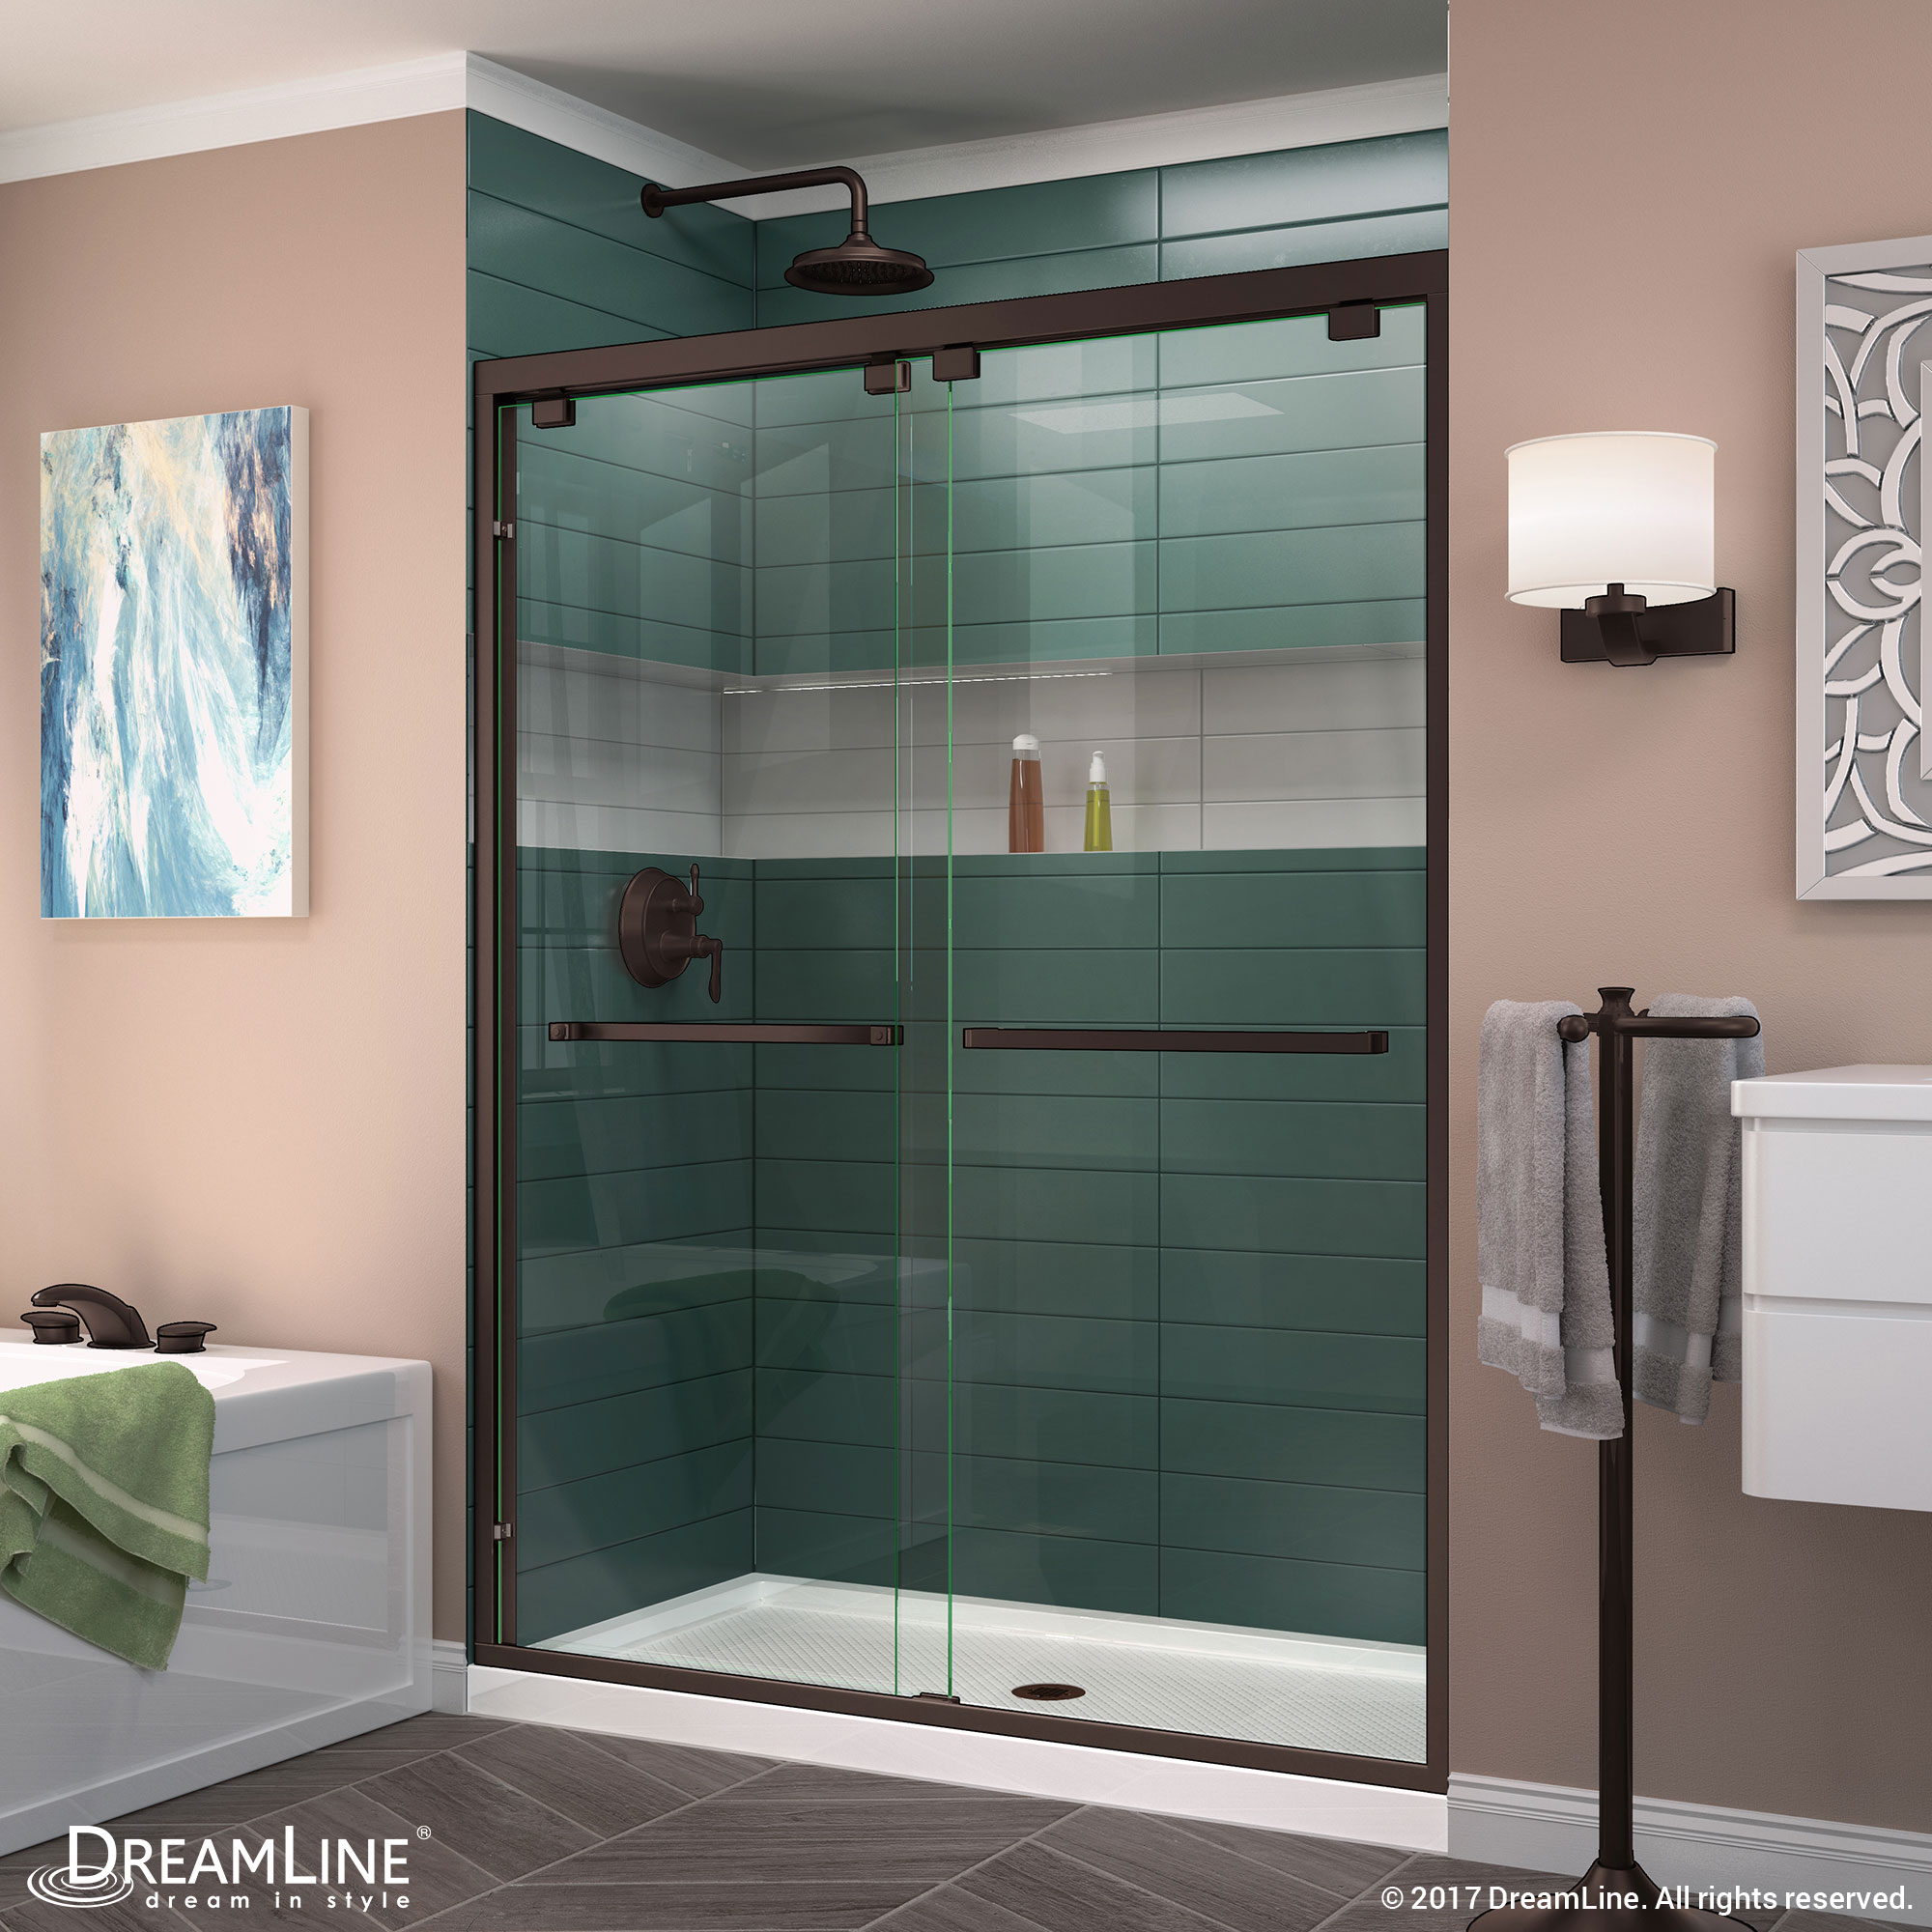 DreamLine Encore 34 in. D x 48 in. W x 78 3/4 in. H Bypass Shower Door in Brushed Nickel and Center Drain Biscuit Base Kit